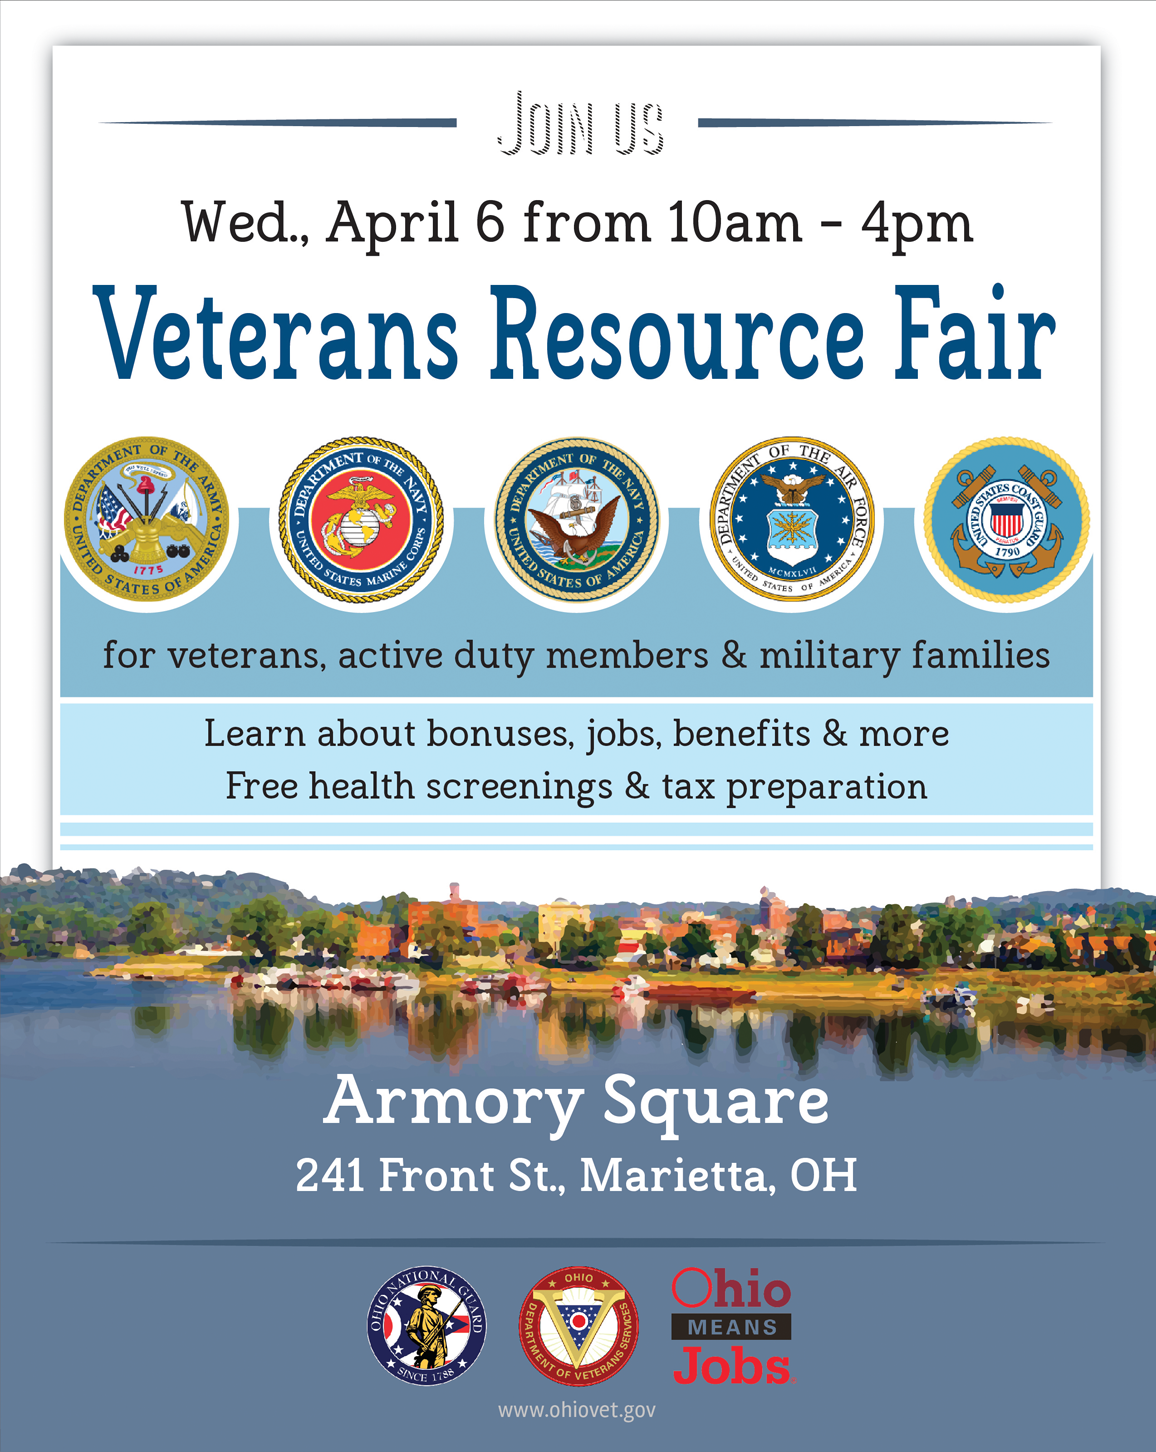 Governor's Resource Fair event flyer